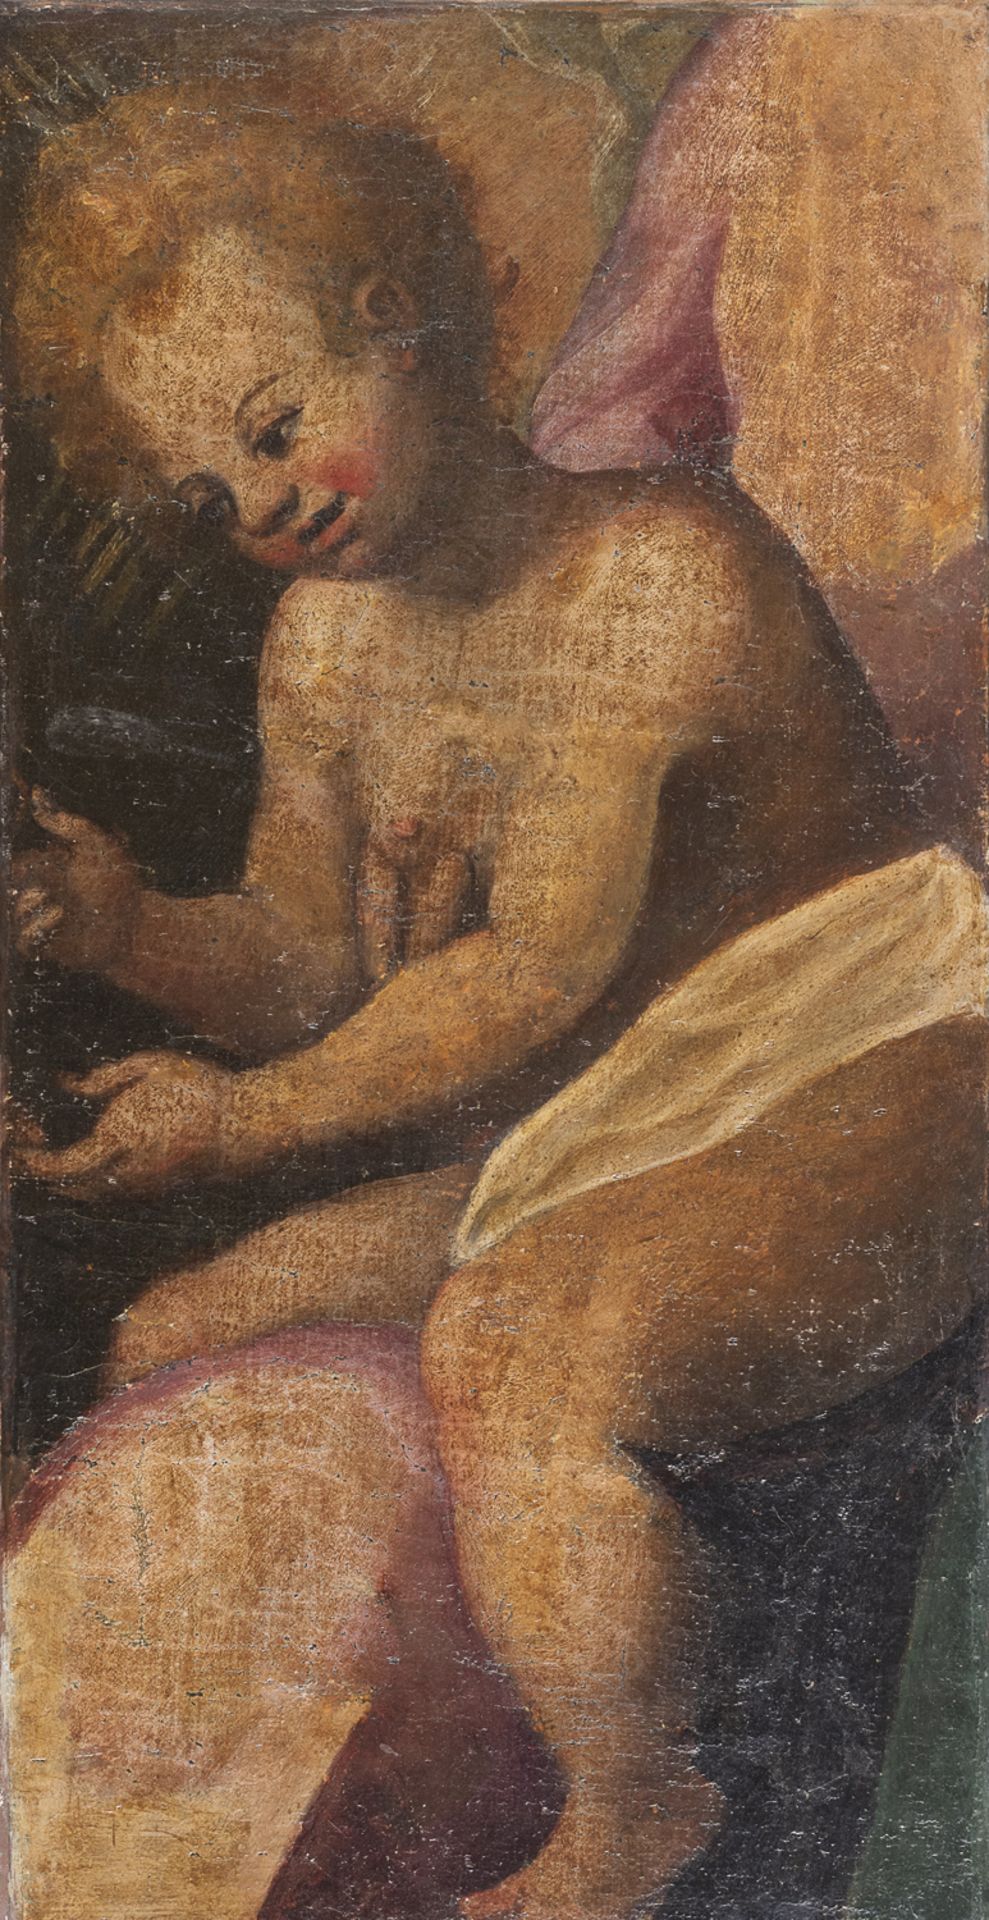 CENTRAL ITALIAN OIL PAINTING SECOND HALF 16TH CENTURY